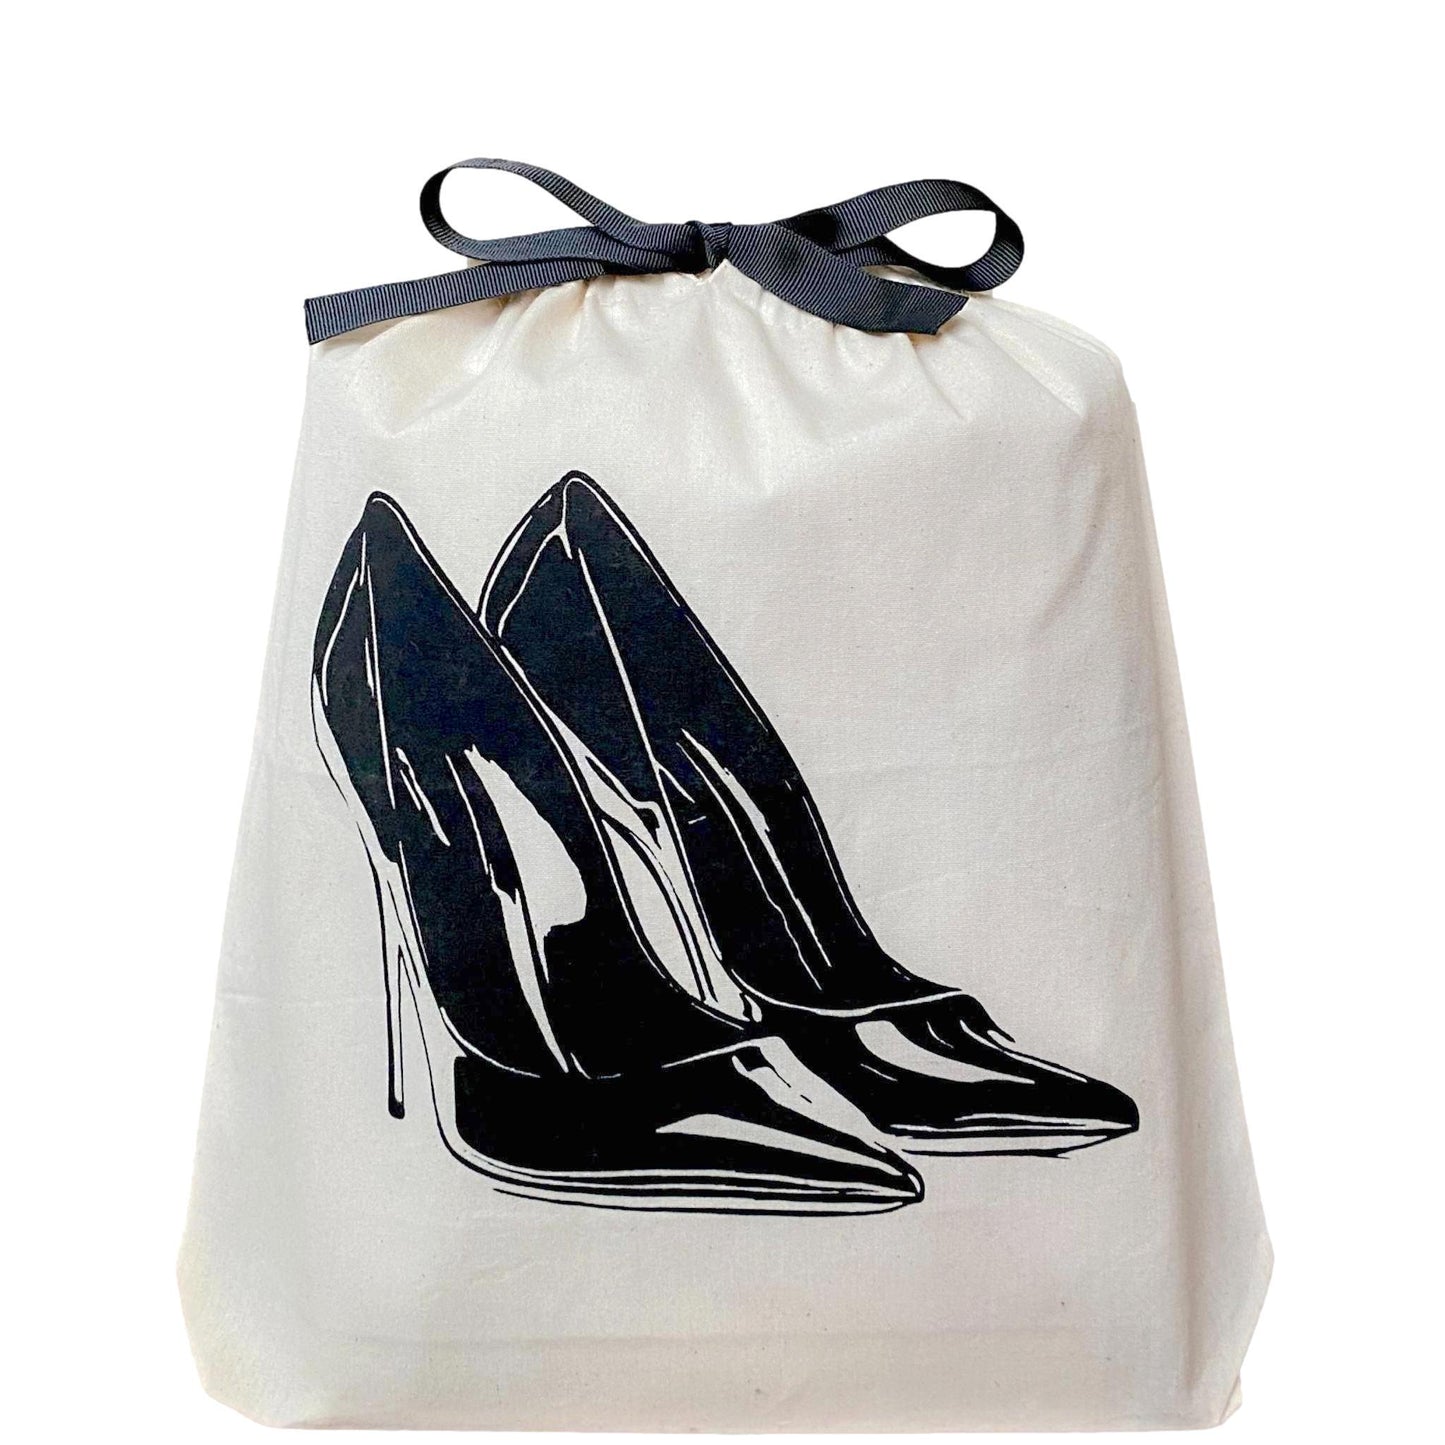  MBBJM Glossy shoe bag set with European style chunky